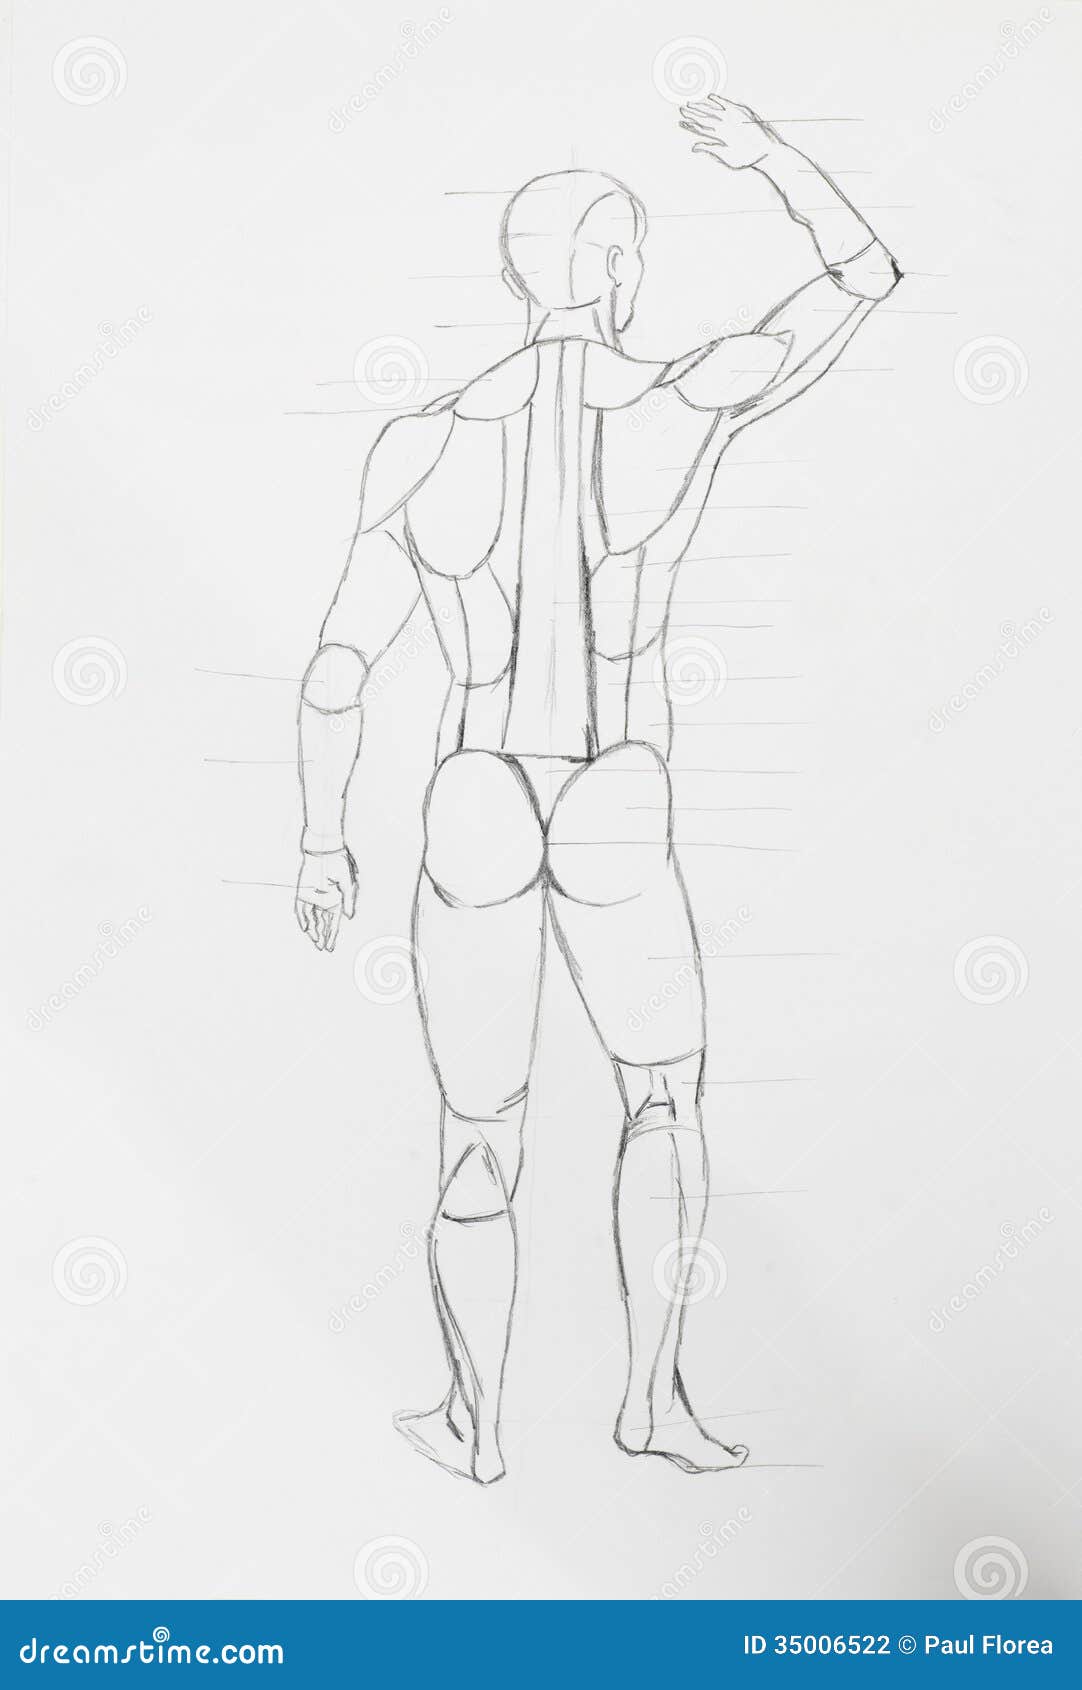 Leopold Reuther - Anatomical drawing of a human back